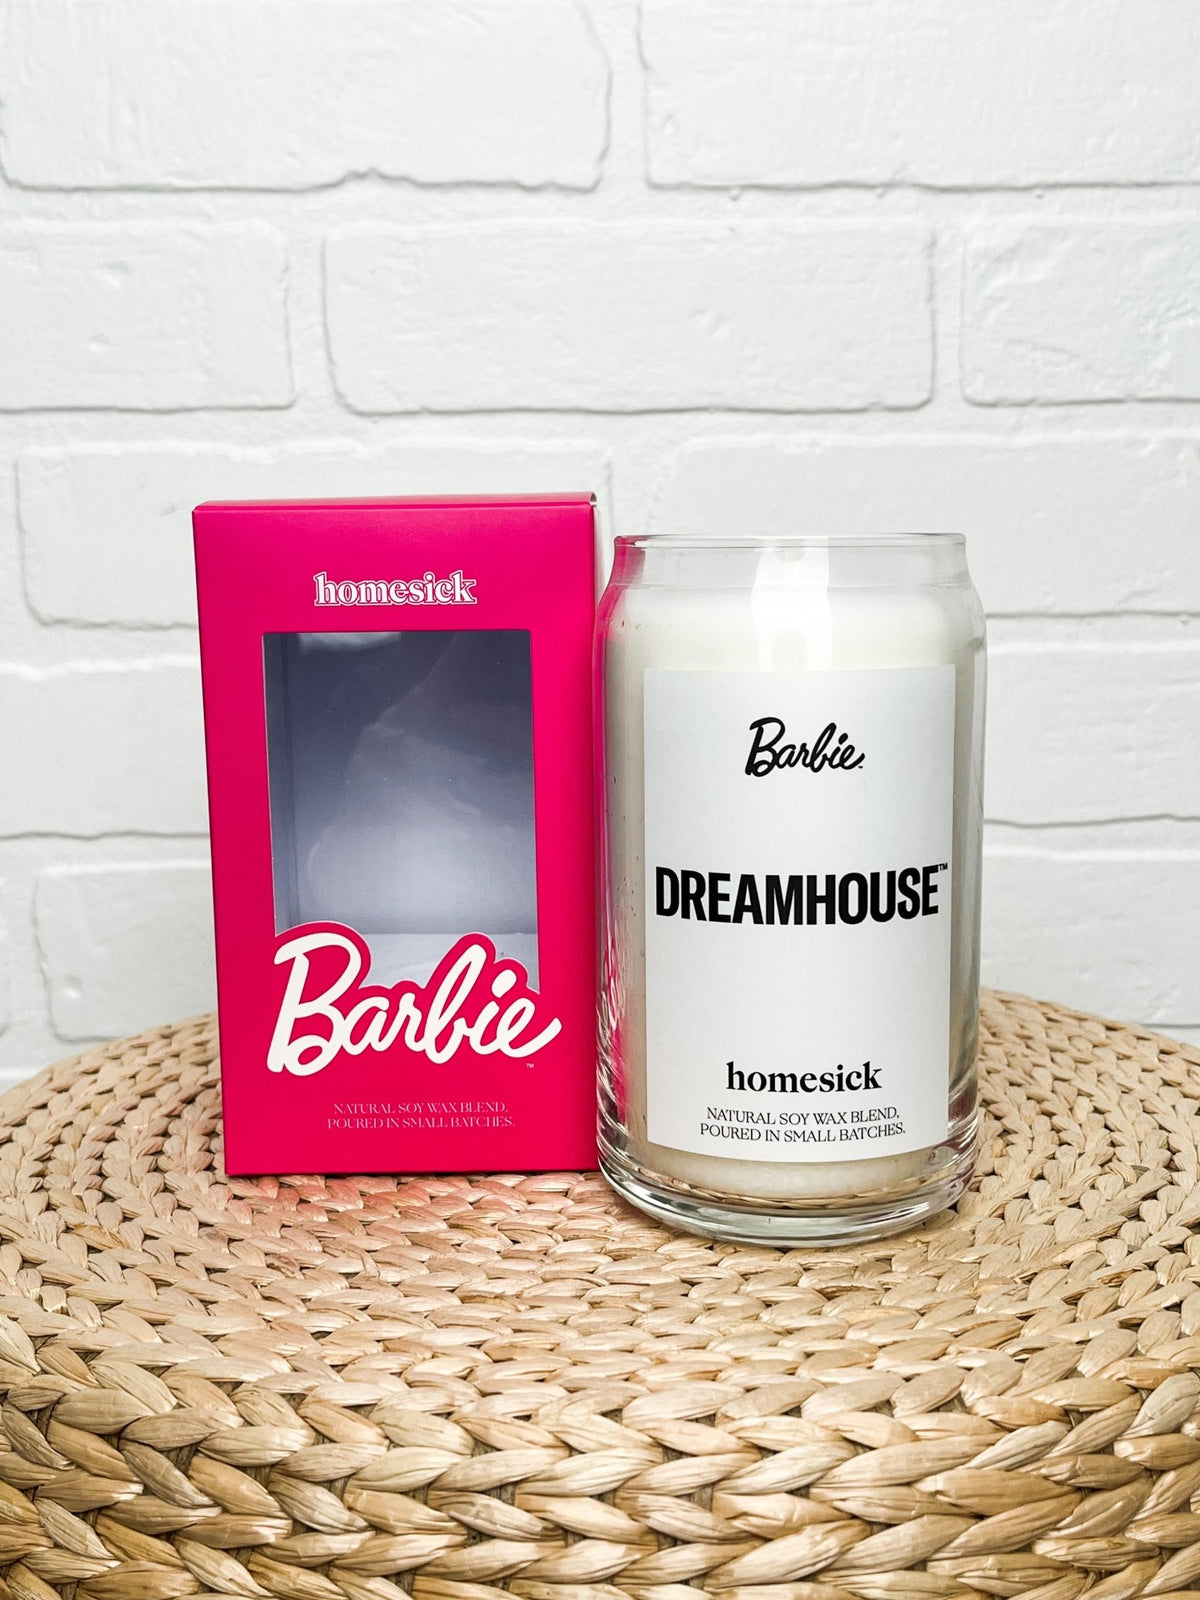 Homesick Barbie Dreamhouse candle - Trendy Candles at Lush Fashion Lounge Boutique in Oklahoma City